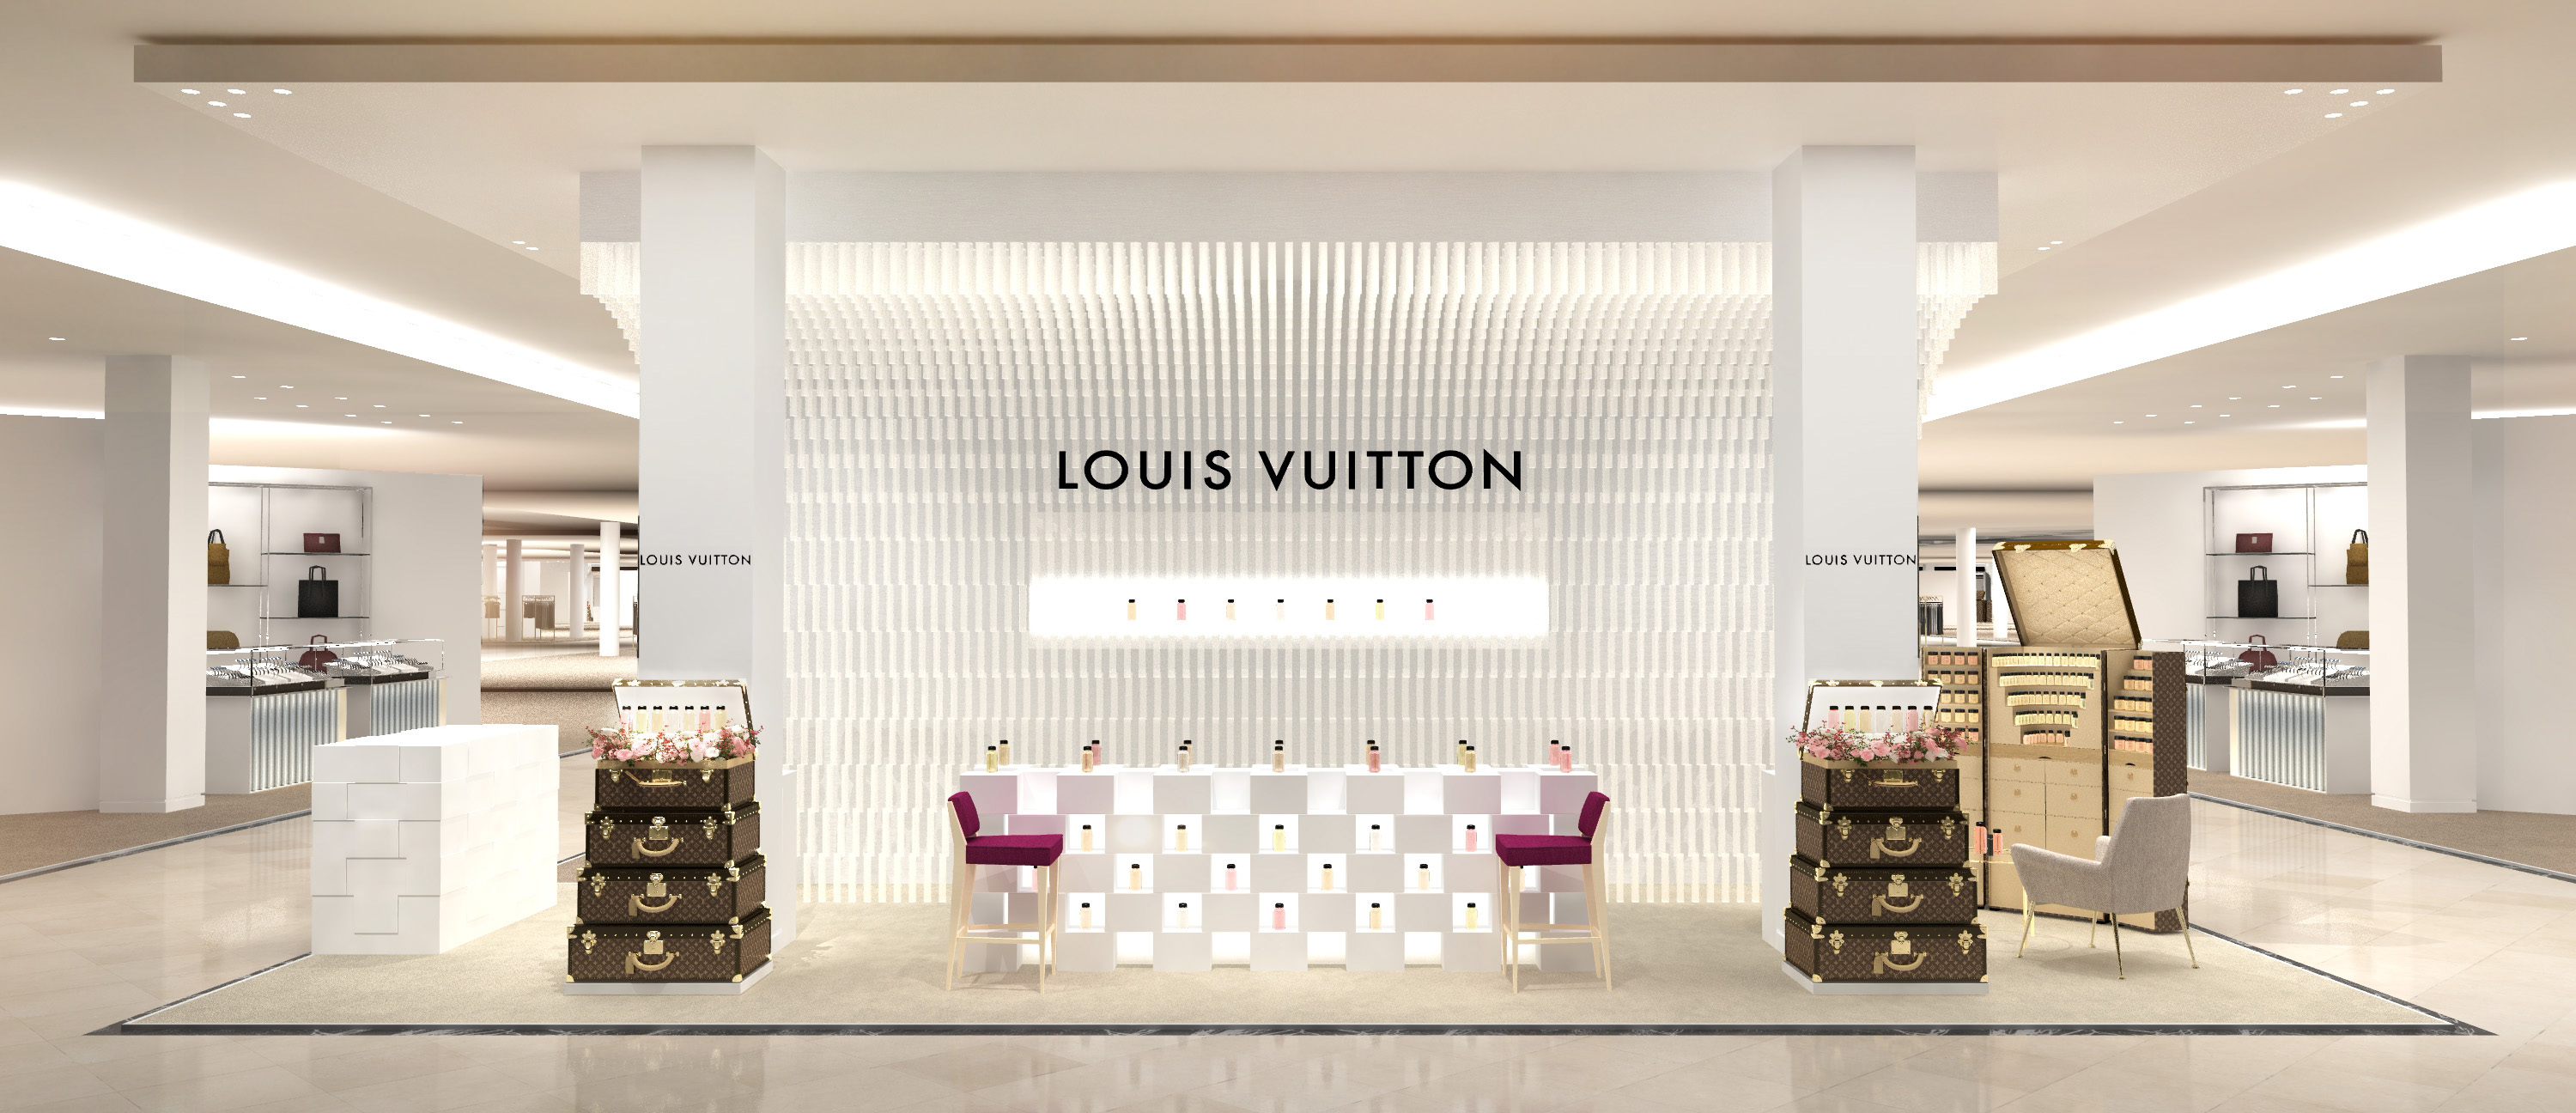 JUST LAUNCHED, Louis Vuitton Perfume